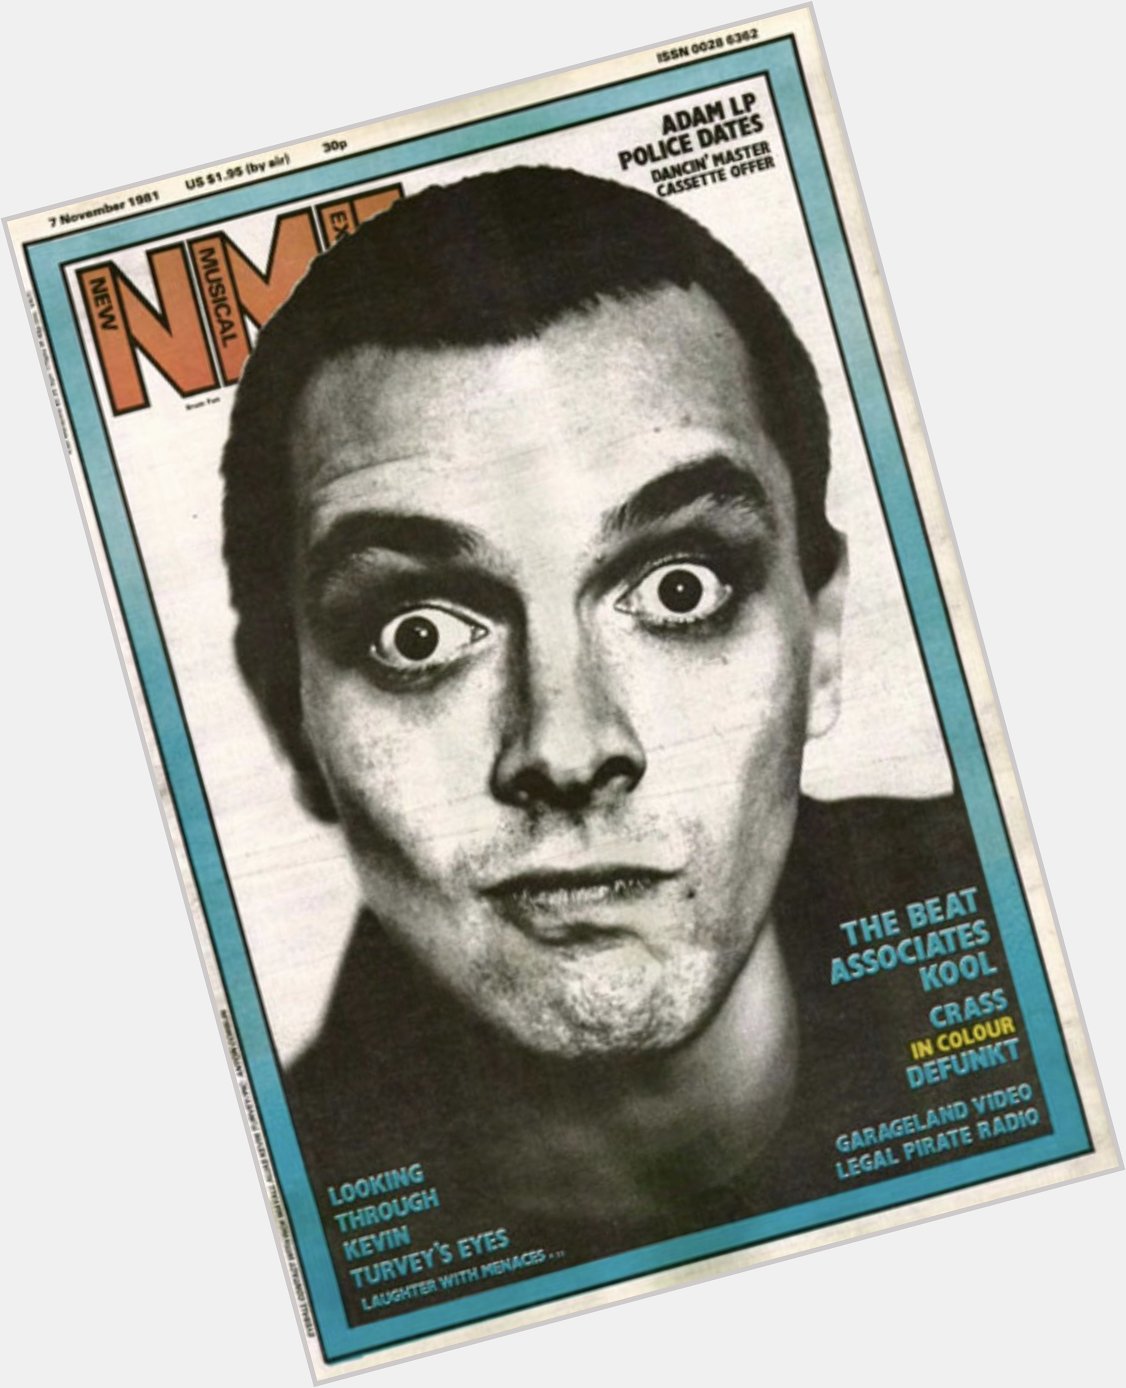 Happy Birthday Rik Mayall who would have been 61 today    